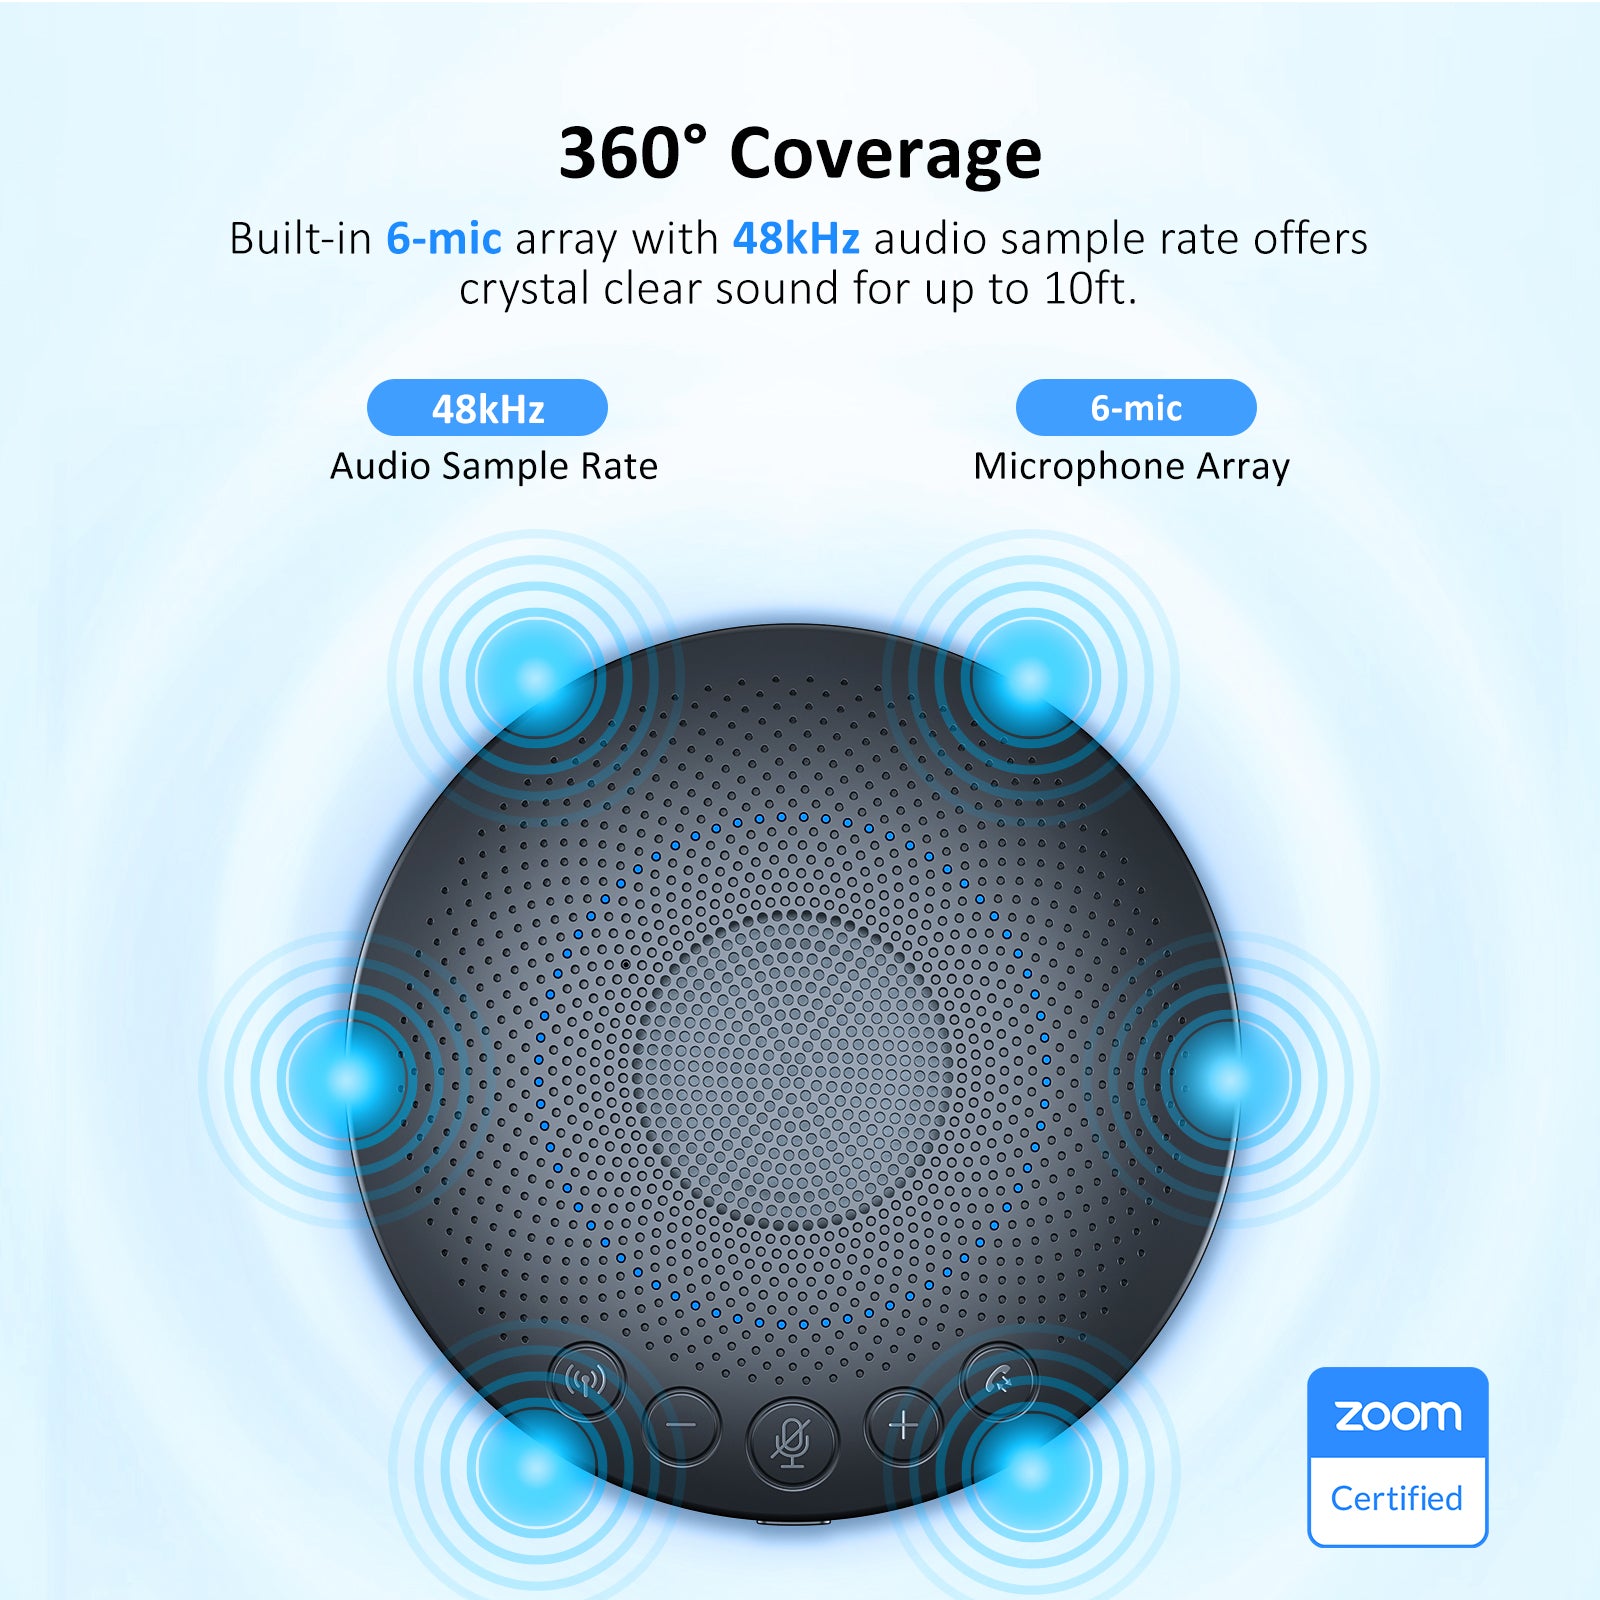 The Bluetooth Speakerphone features a 360° pickup, 6-mic array, crystal clear sound up to 10ft.